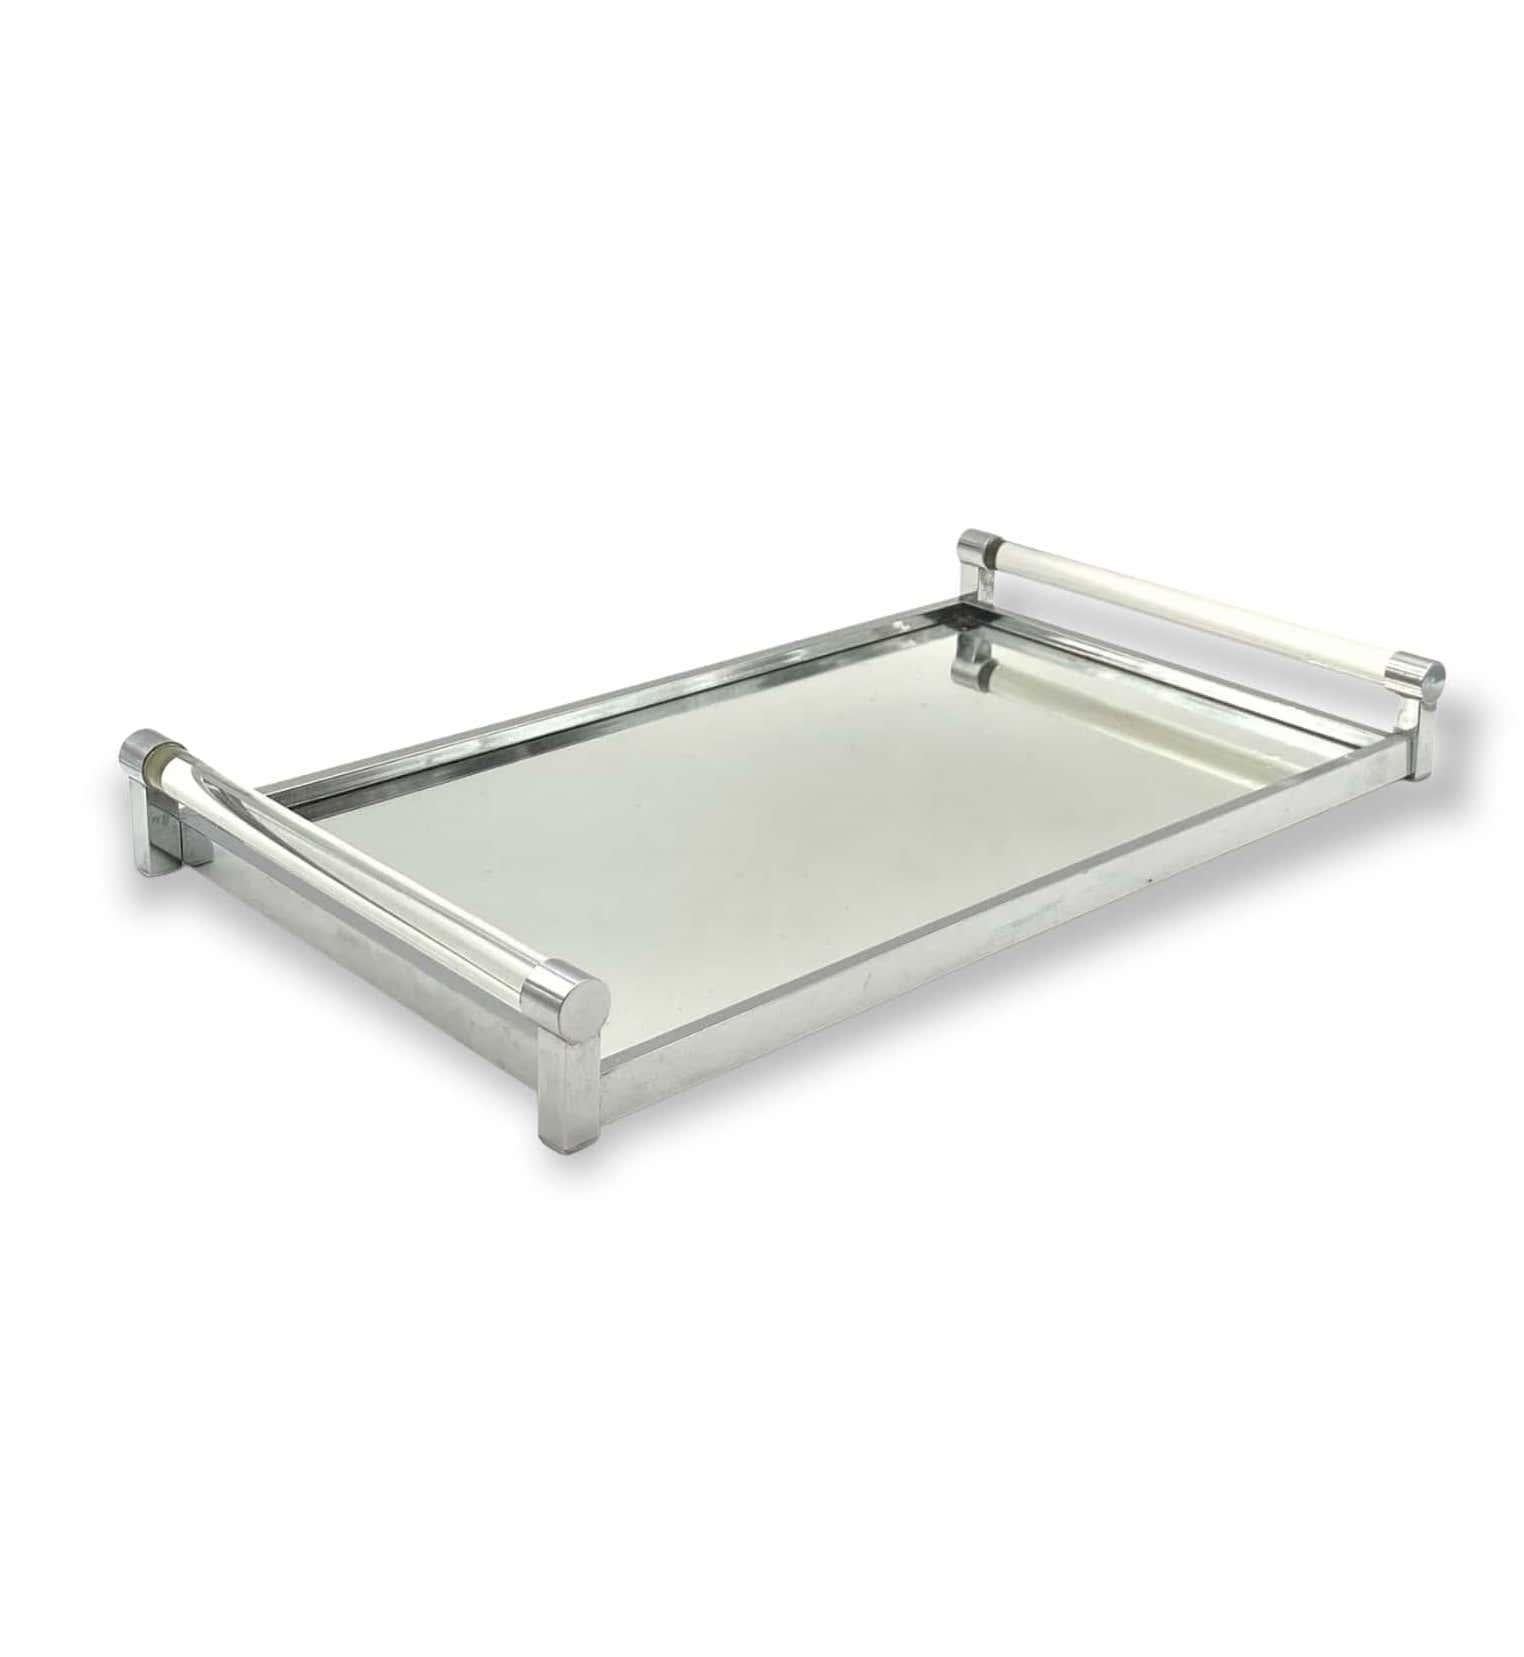 Mid-Century Modern Jacques Adnet, Modernist lucite mirrored tray, Maison Adnet, France 1940s For Sale